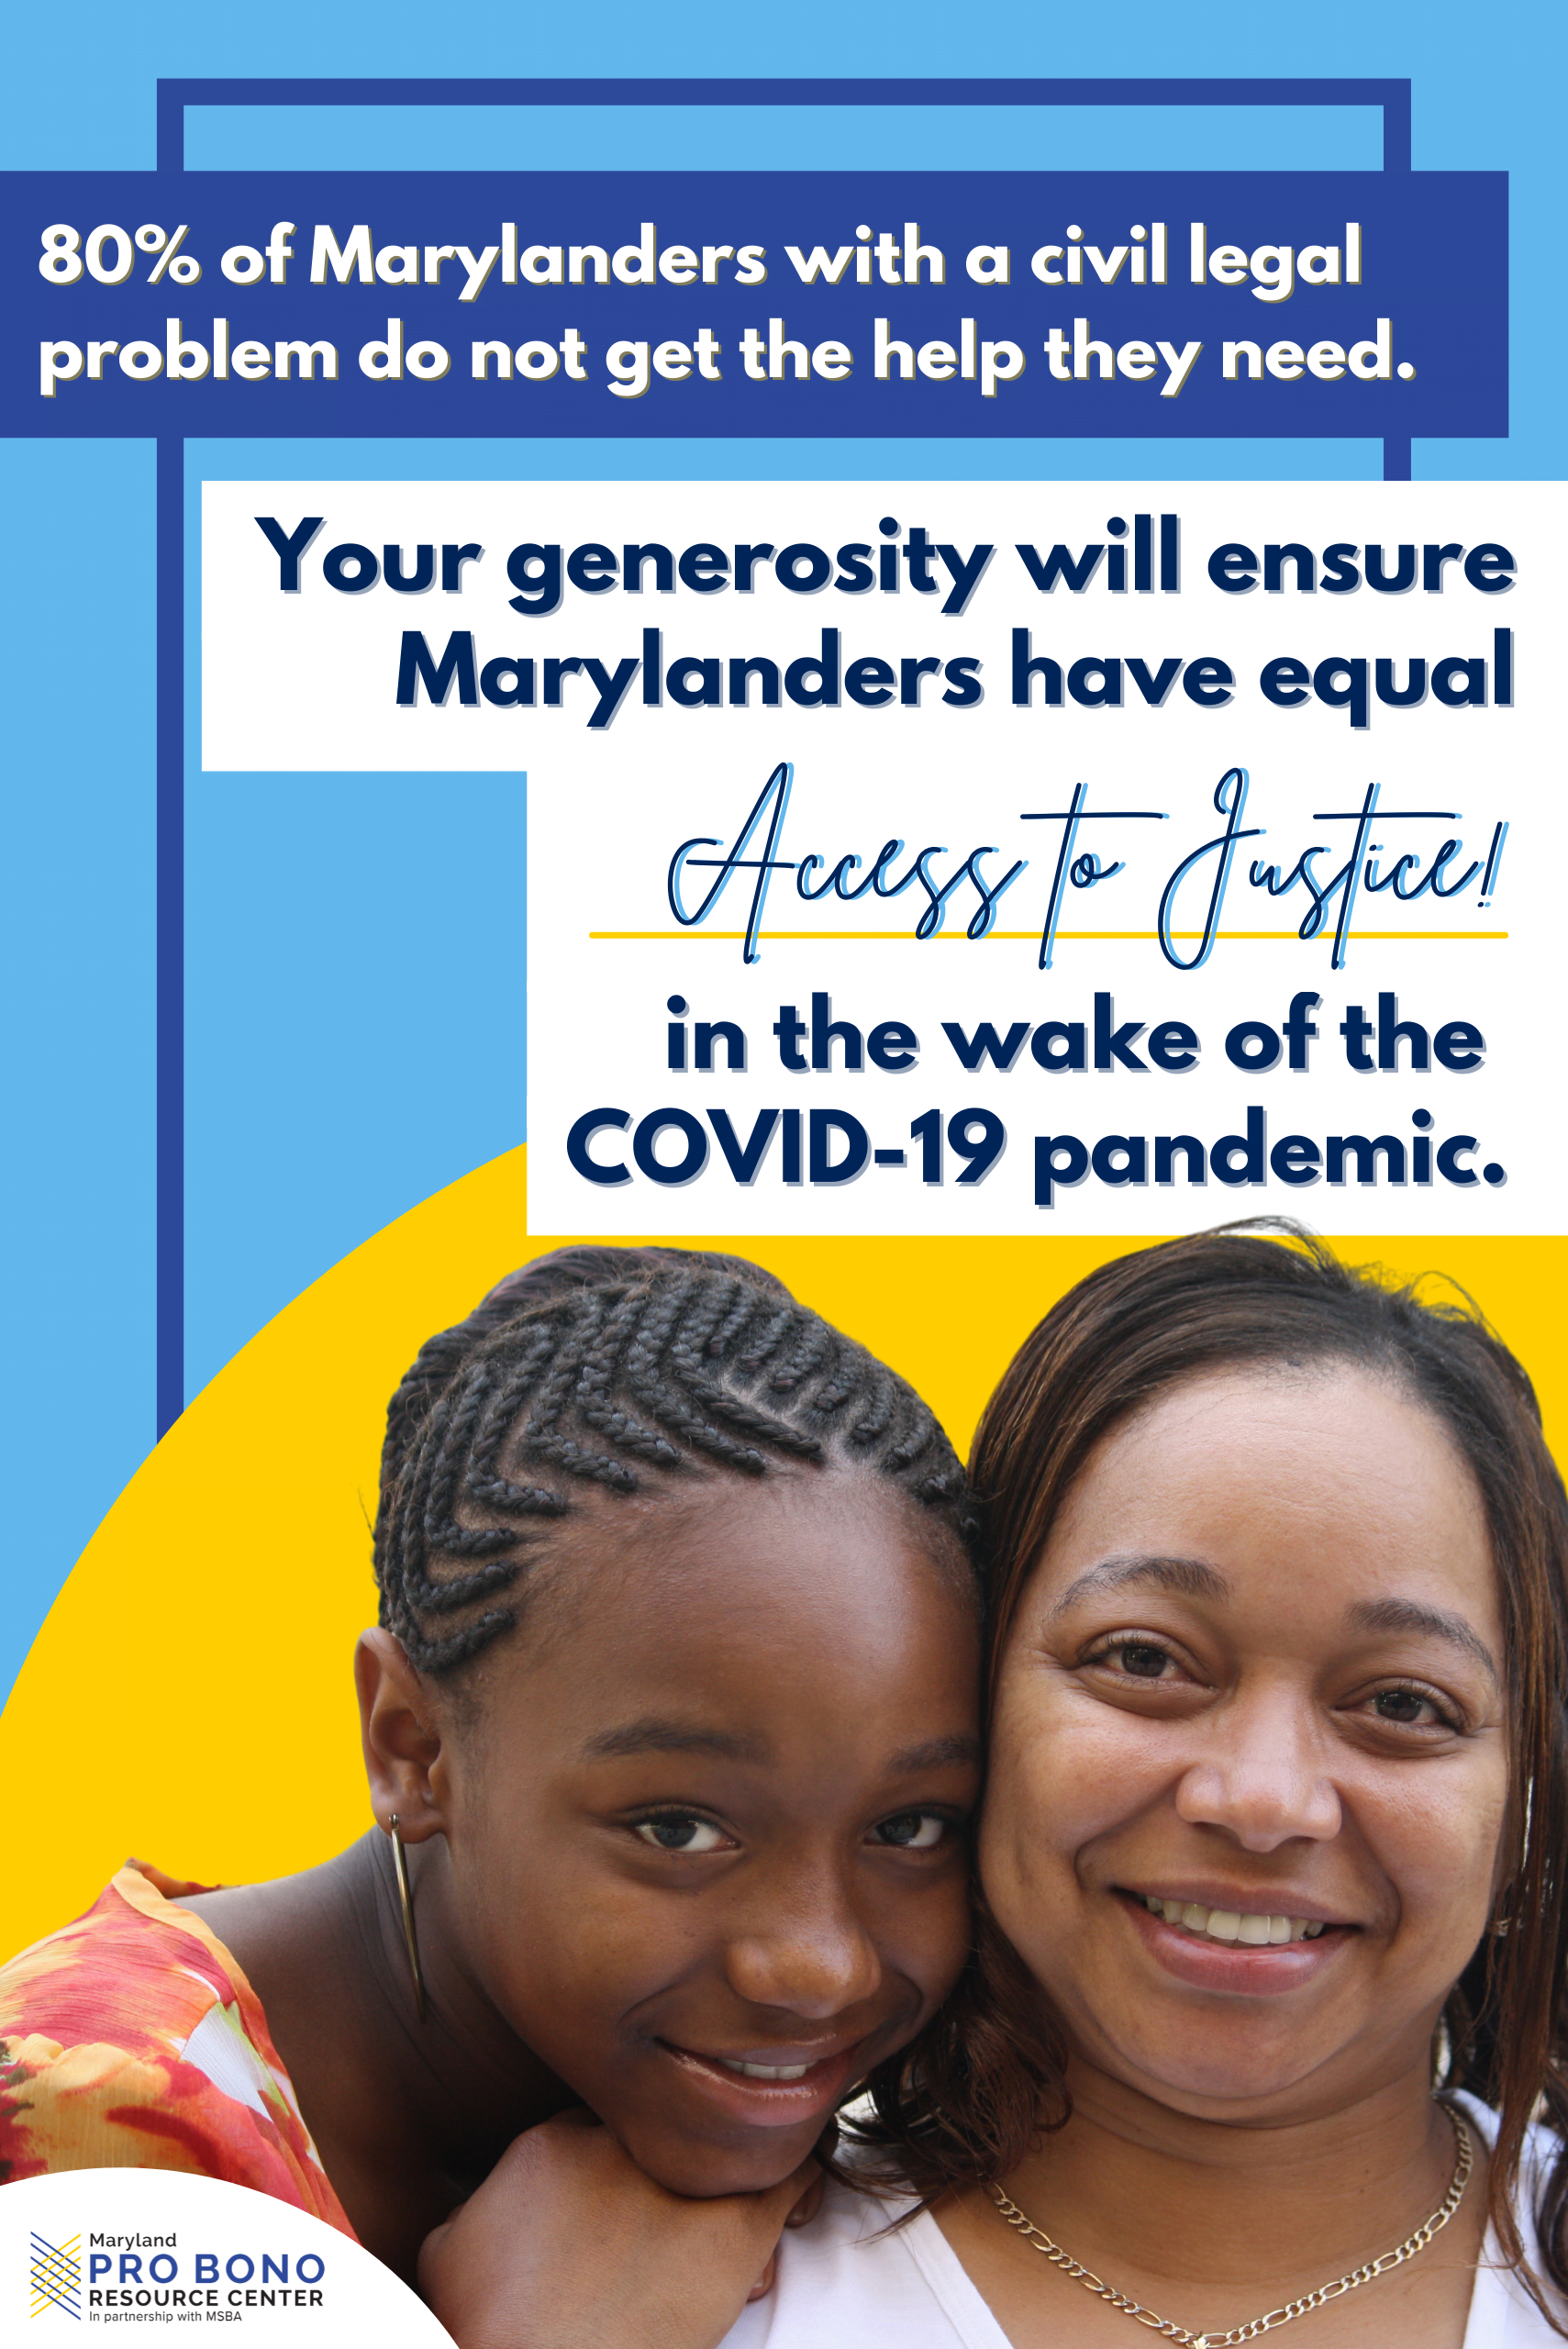 80% of Marylanders with a civil legal problem do not get the help they need.